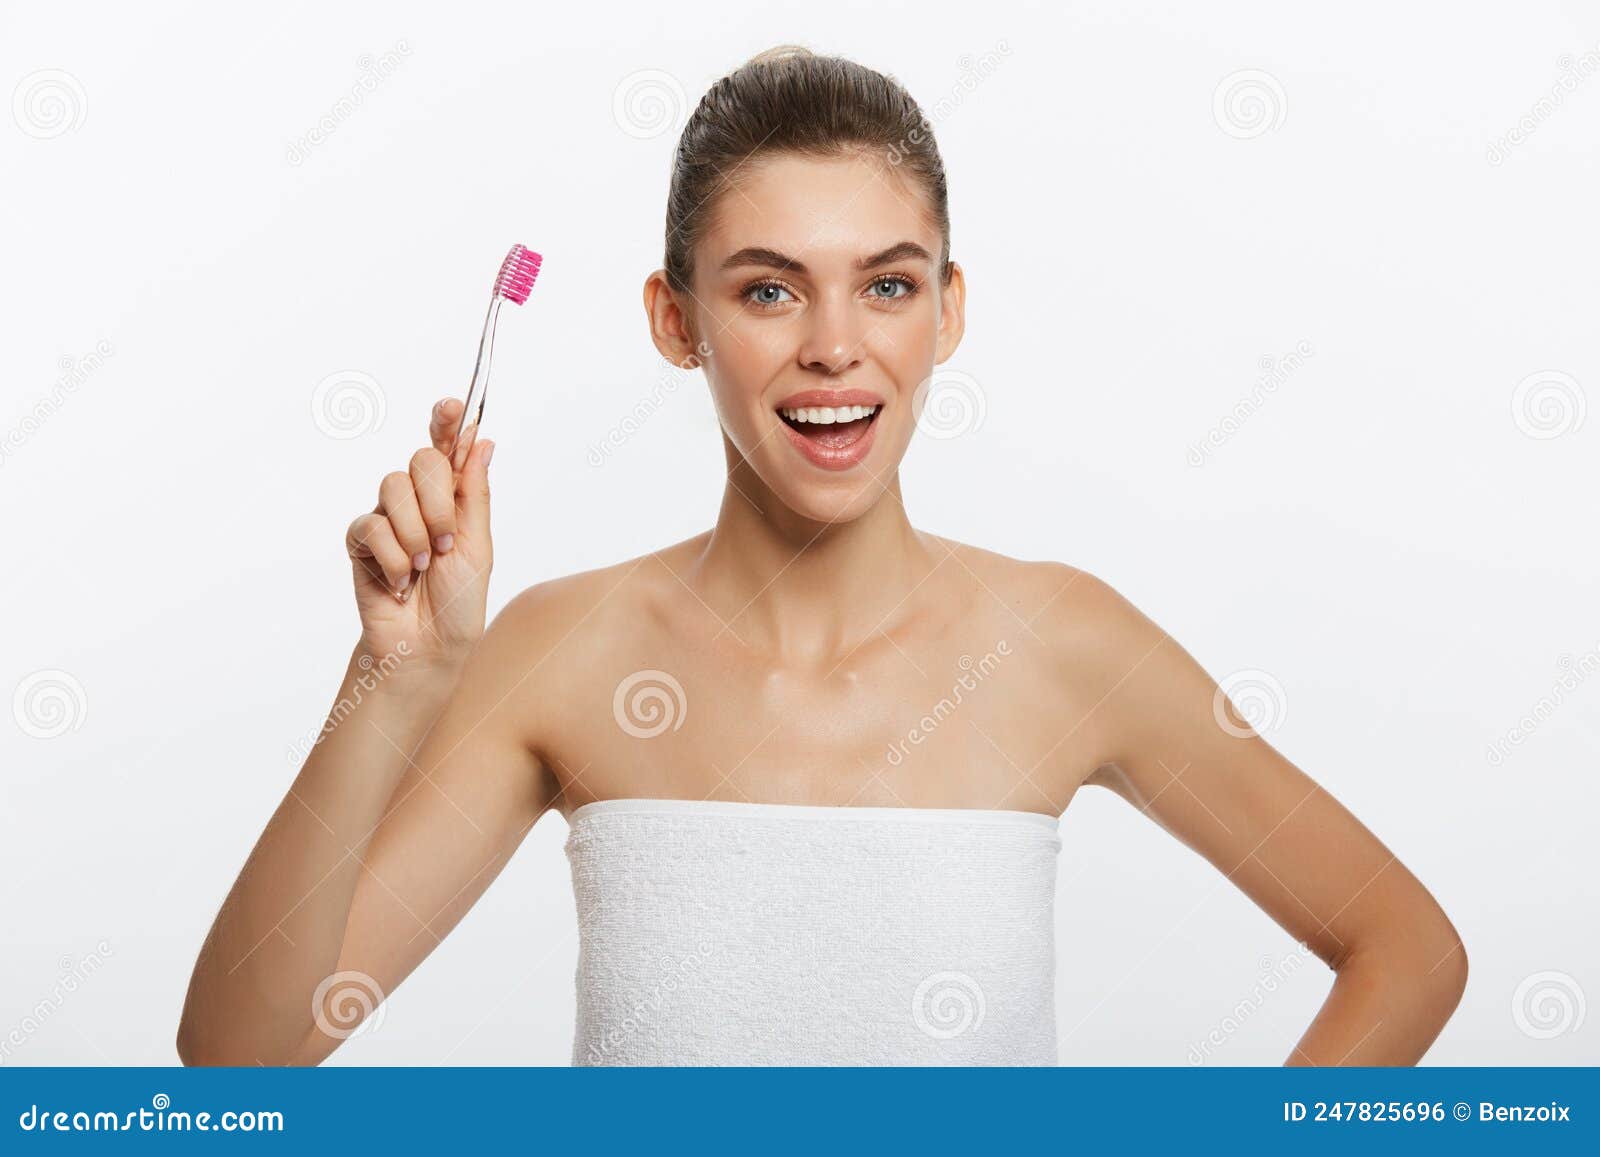 Beauty Portrait Of A Happy Beautiful Half Naked Woman Brushing Her